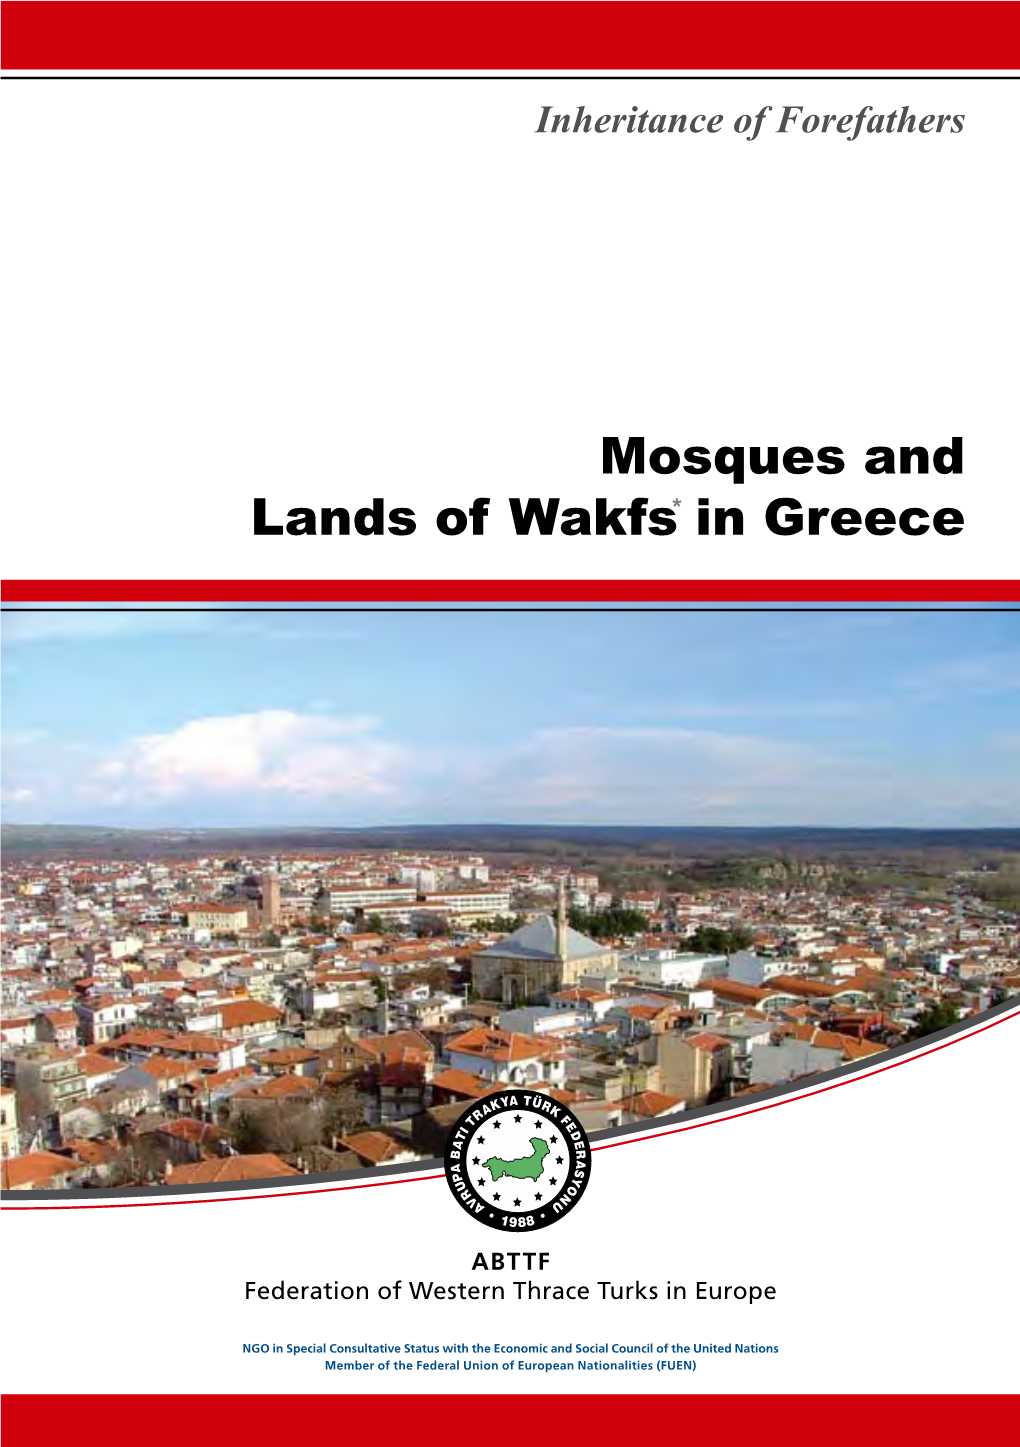 Mosques and Wakfs in Western Thrace-Greece